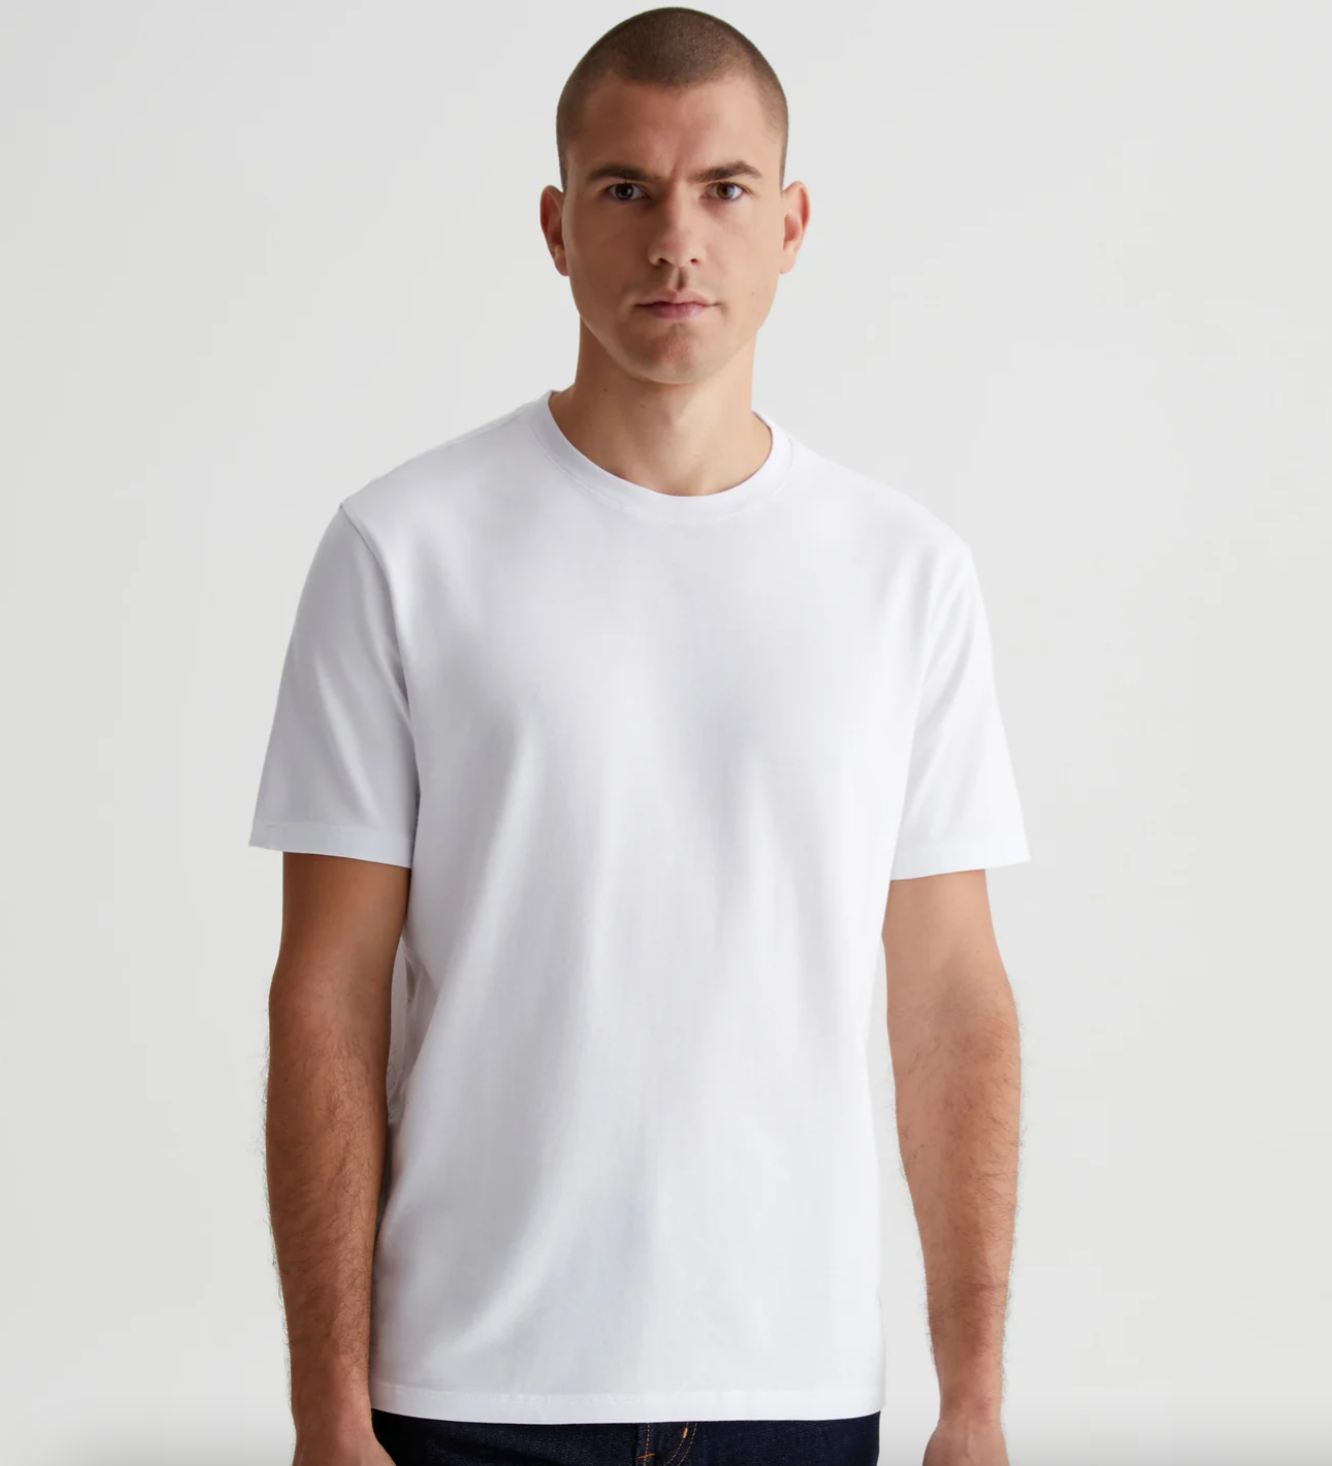 AG CORE Bryce Crew Tee-Men's T-Shirts-Yaletown-Vancouver-Surrey-Canada